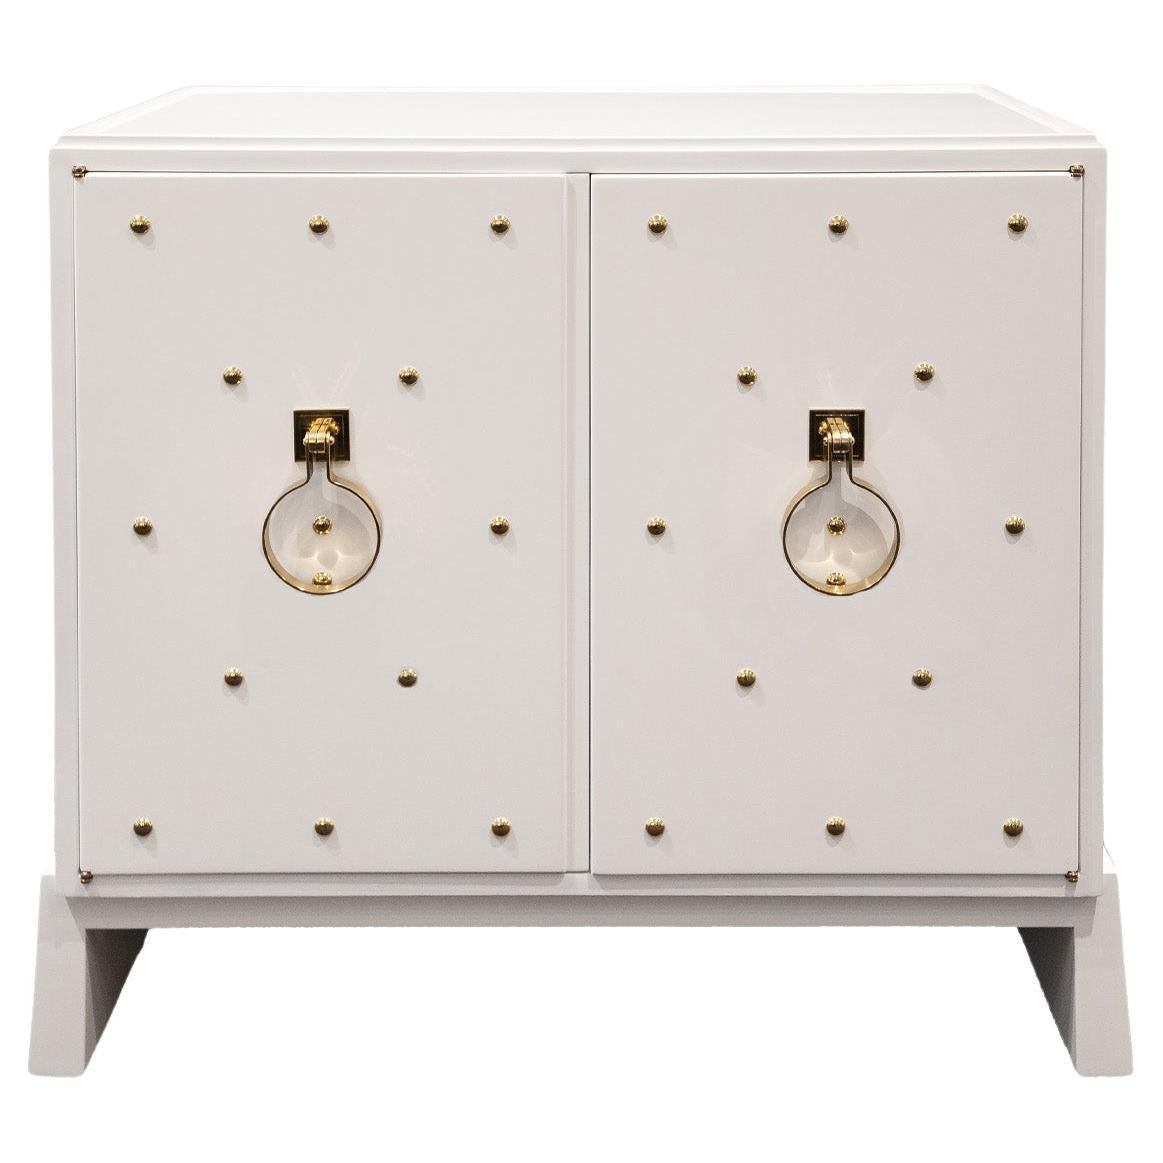 Tommi Parzinger Iconic Cabinet with Brass Studs 1950s, 'Signed' For Sale